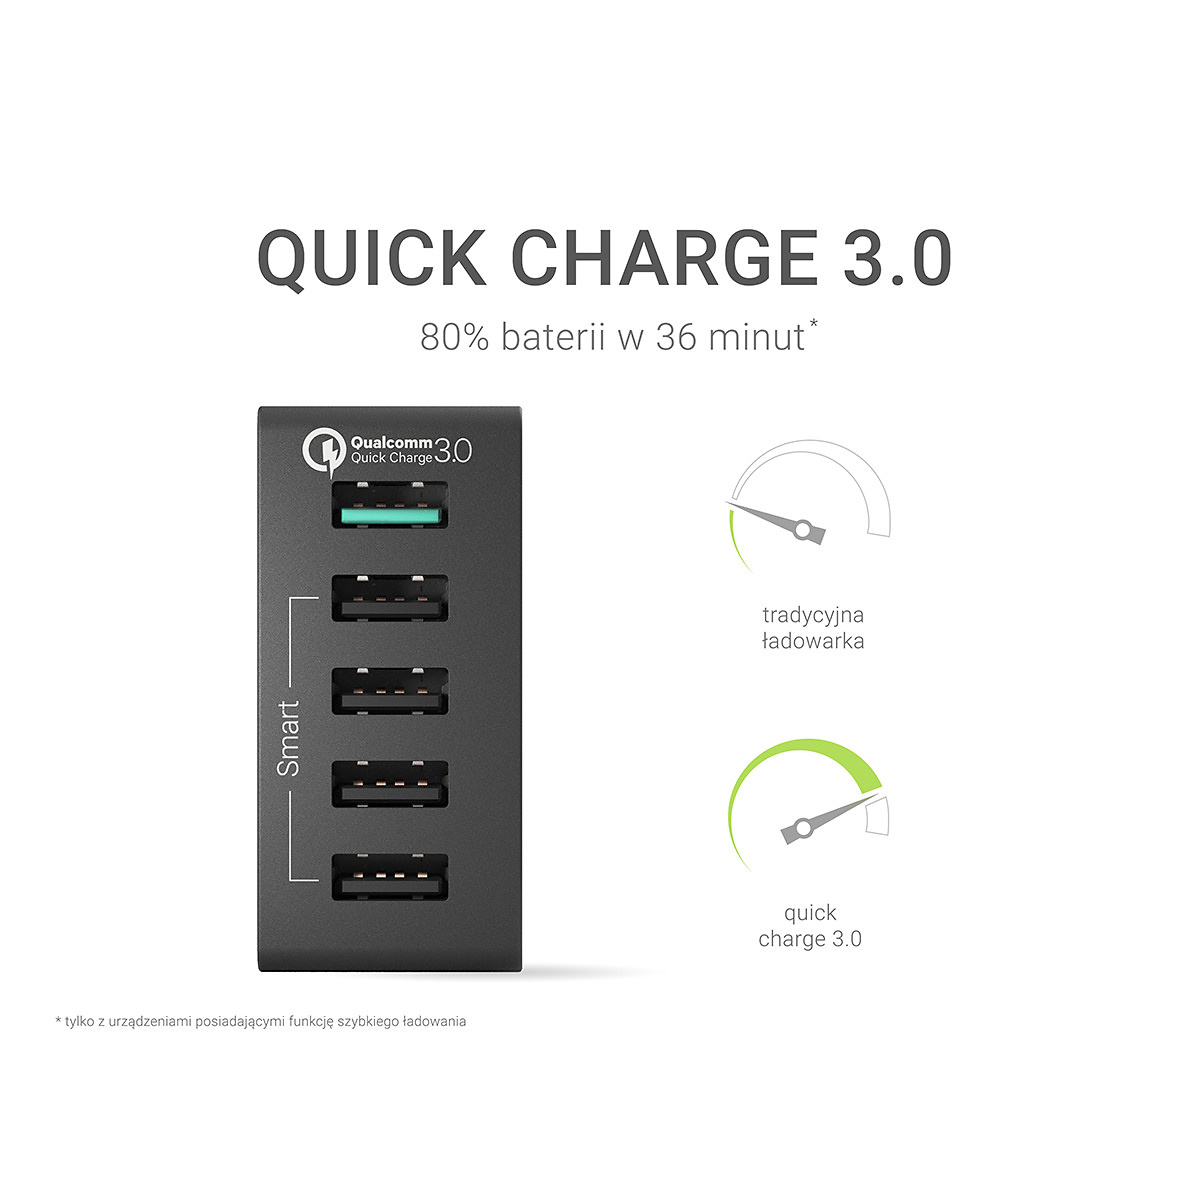 Green Cell Charger 5xUSB Quick Charge 3.0